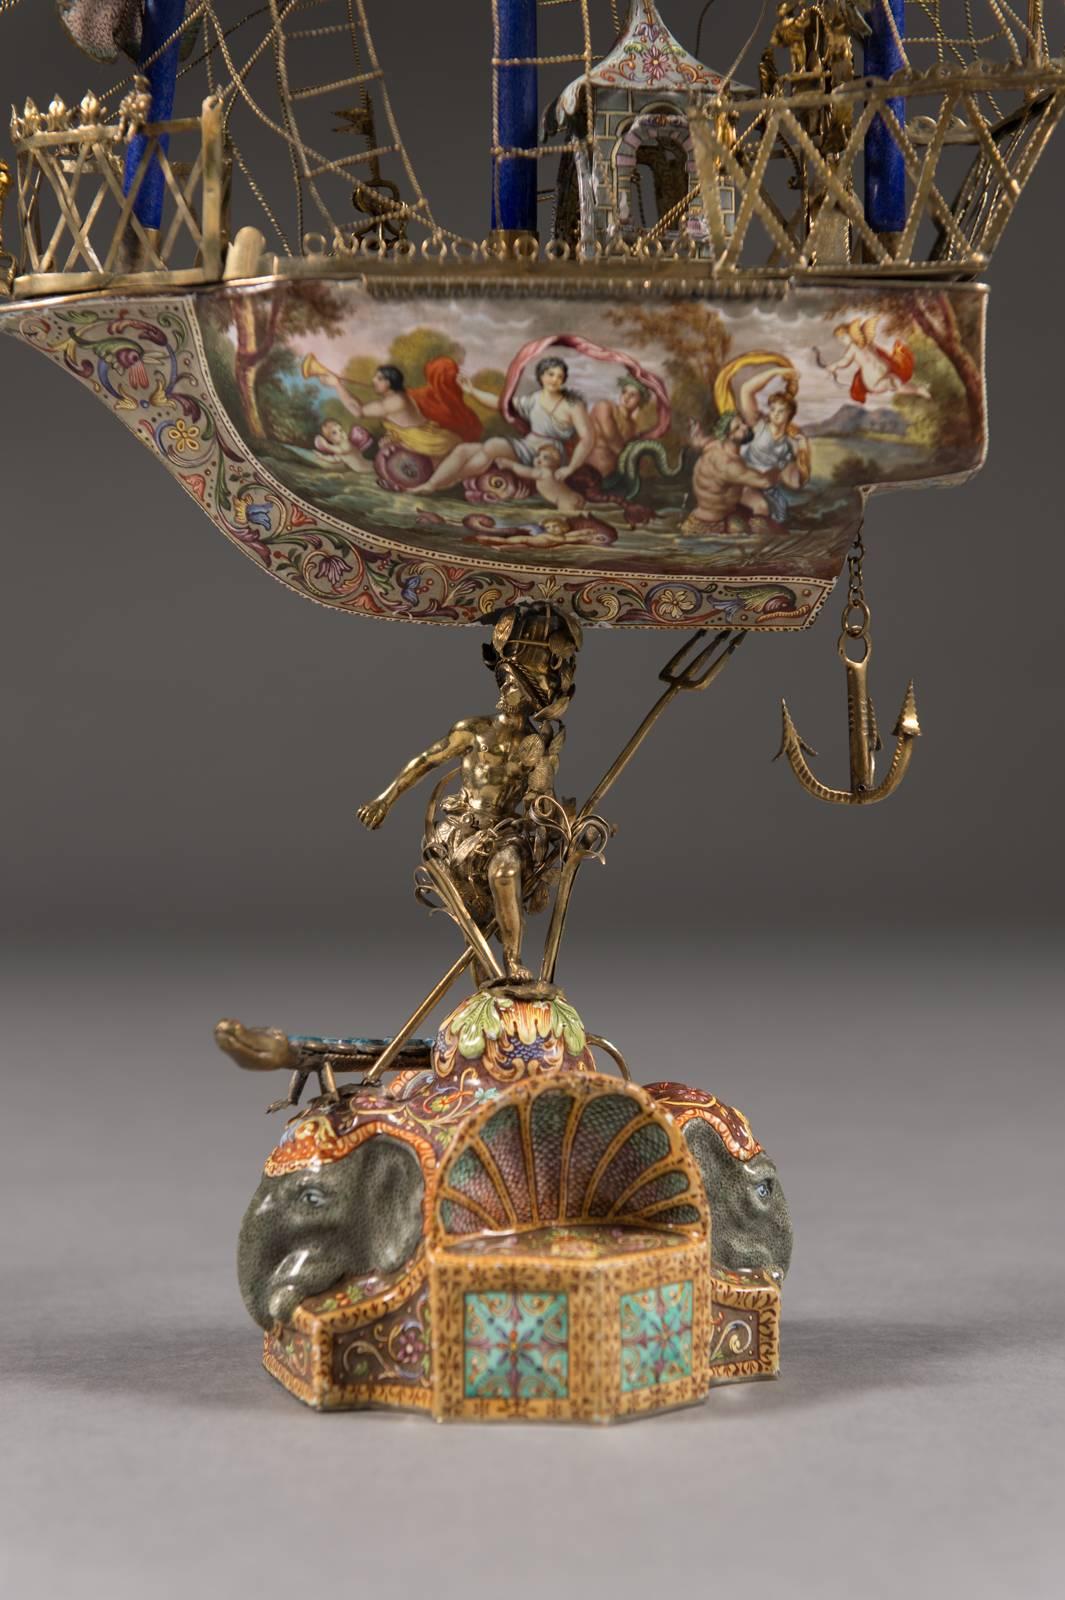 
A Very Fine Viennese parcel-gilt silver and enamel sailing ship by Rudolf Linke,
Vienna, circa 1885-1903.

The silver enameled vessel supported on the back of the Greek mythological figure Poseidon. The base with two elephant heads and a